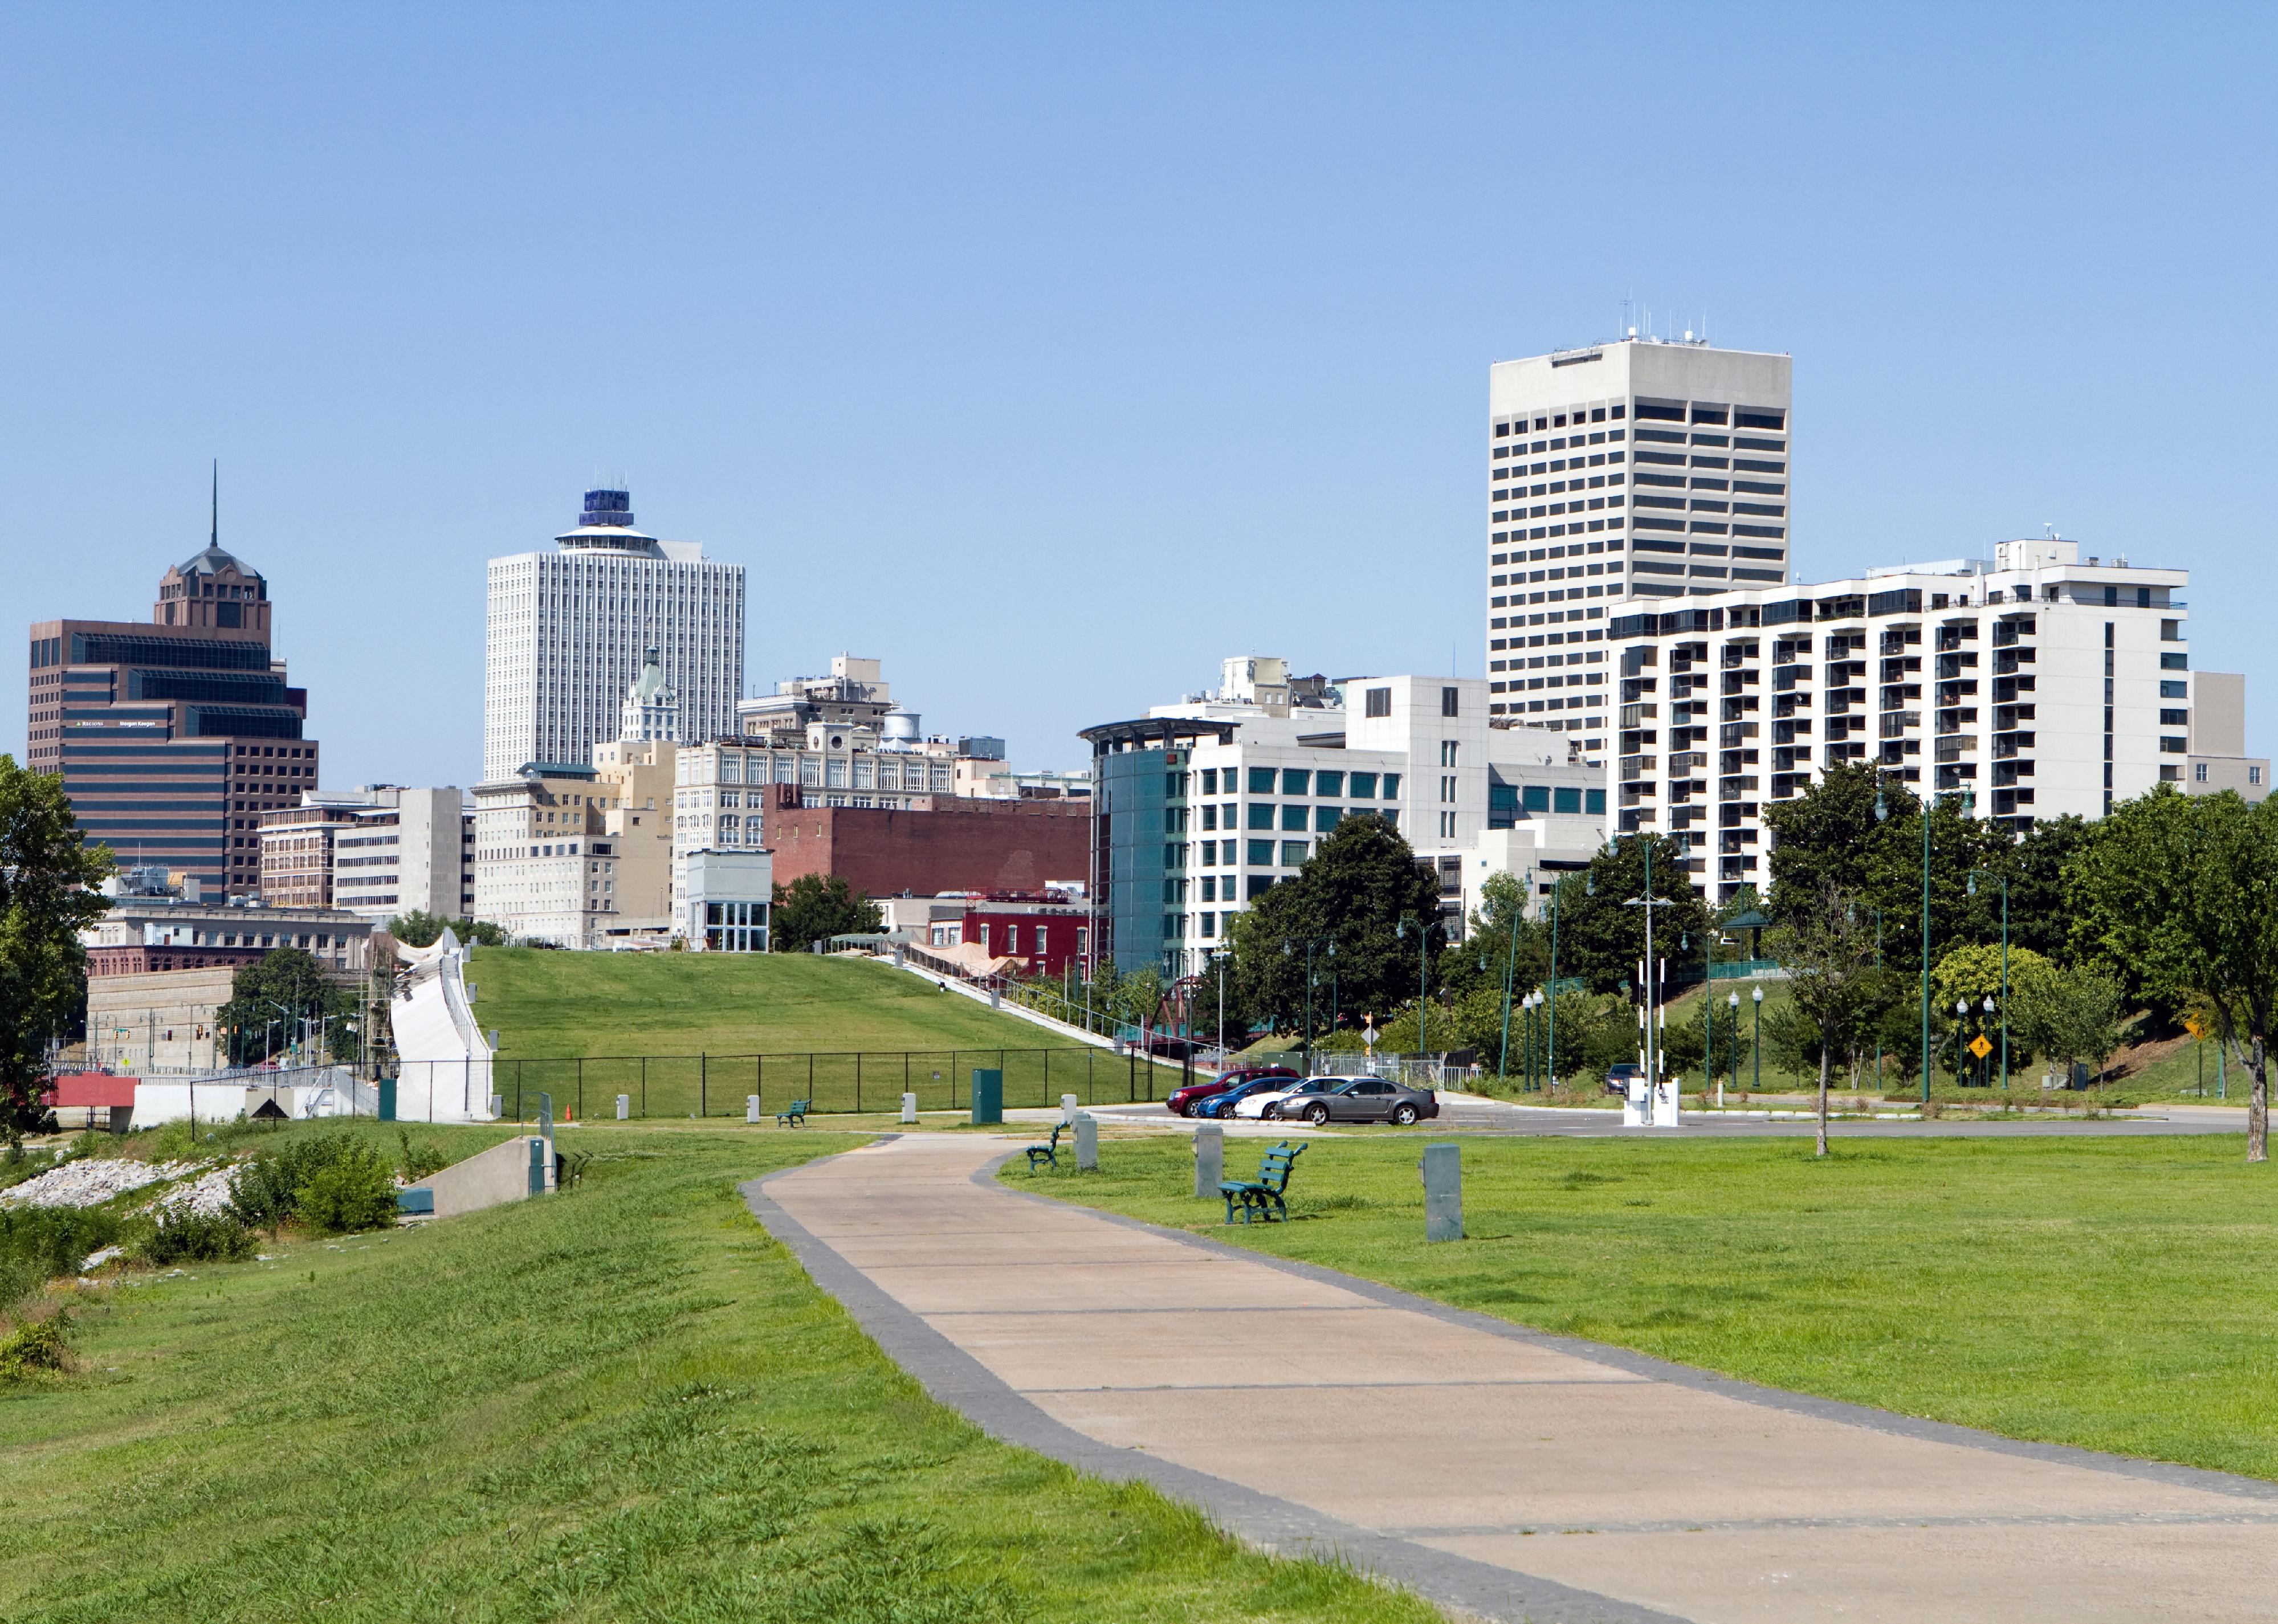 View of the Memphis, Tennessee city skyline from a park in the downtown area.